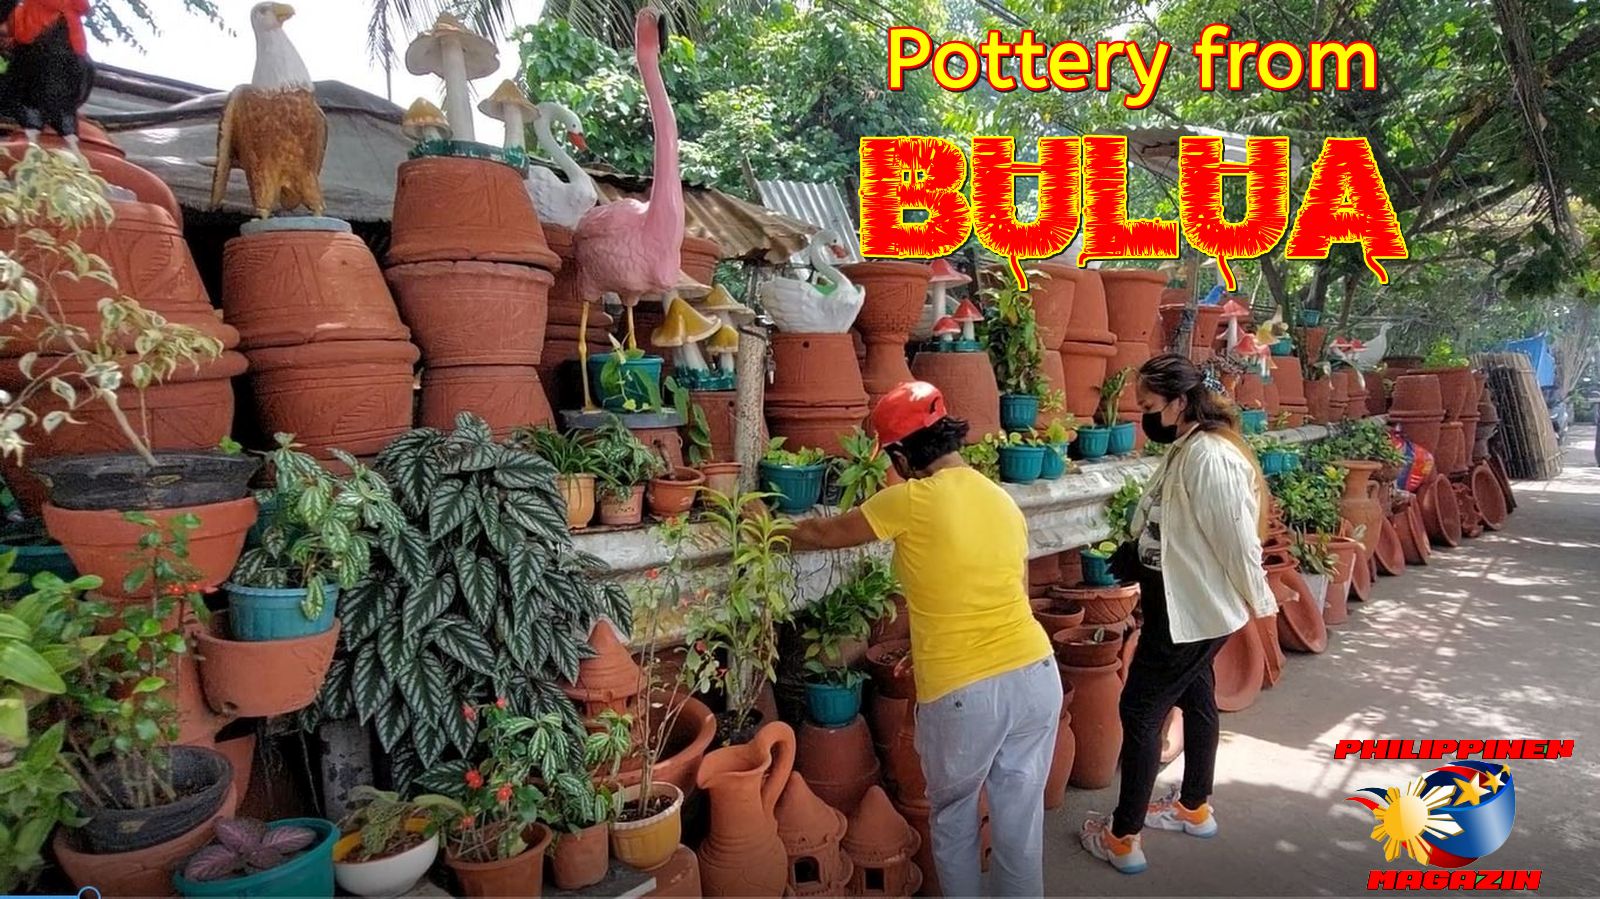 SIGHTS OF CAGAYAN DE ORO CITY & NORTHERN MINDANAO - PHOTO REPORT: Pottery from BULUA